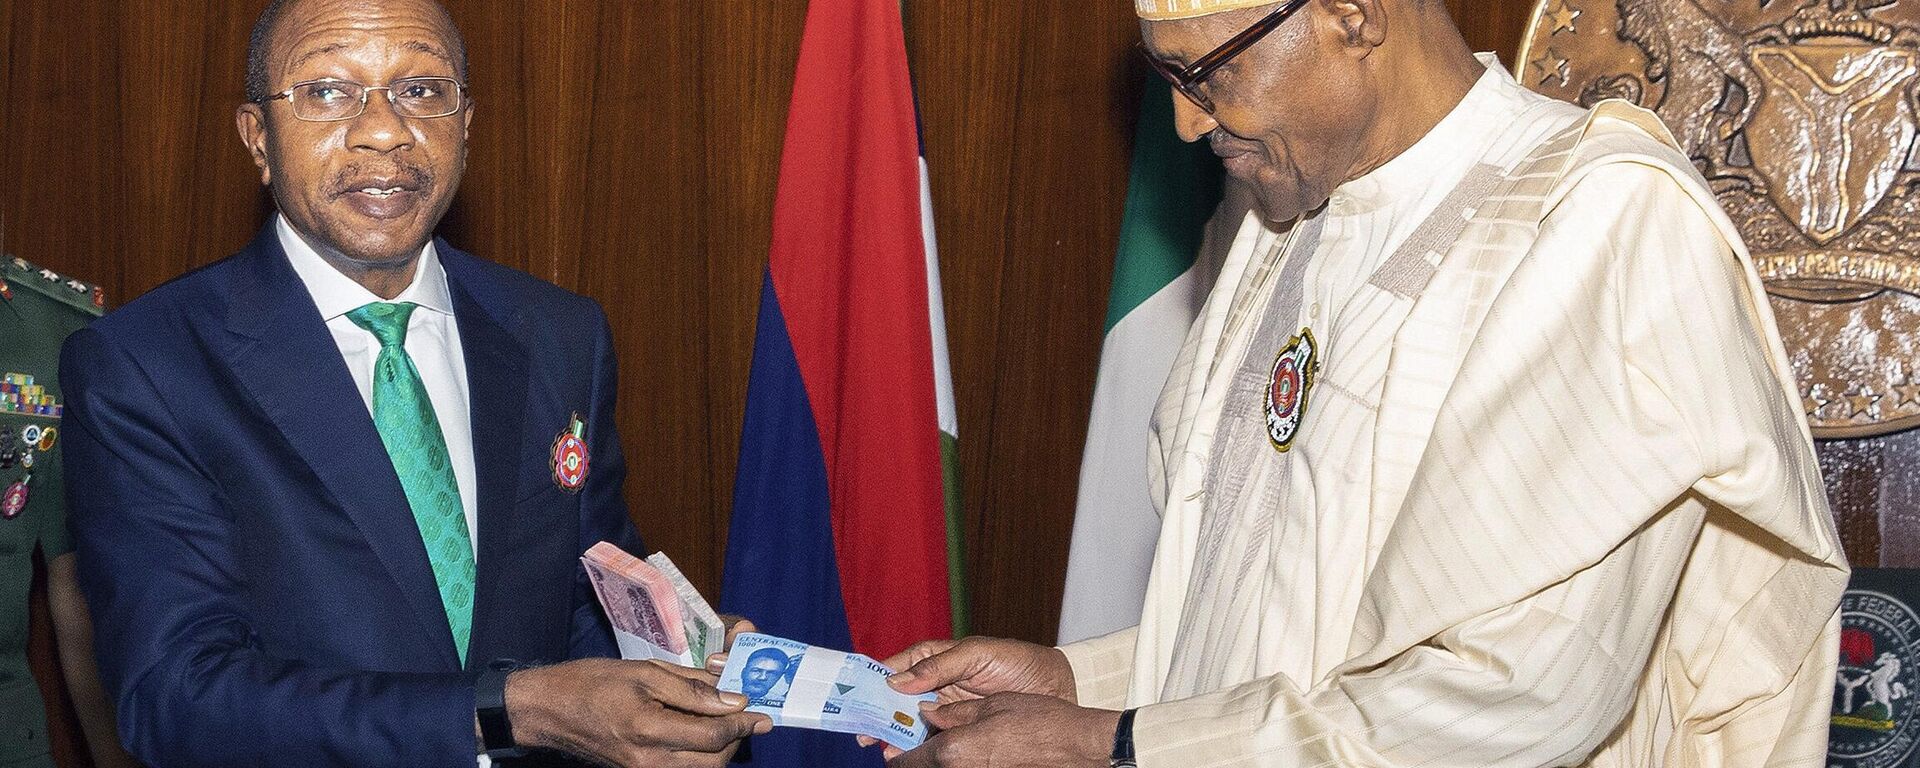 In this photo released by the Nigeria State House, Nigeria's central bank governor, Godwin Emefile, left, presents the newly designed currency notes to Nigeria's President Muhammadu Buhari, right, during a launch in Abuja, Nigeria, Tuesday, Nov. 22, 2022.  - Sputnik International, 1920, 10.12.2022